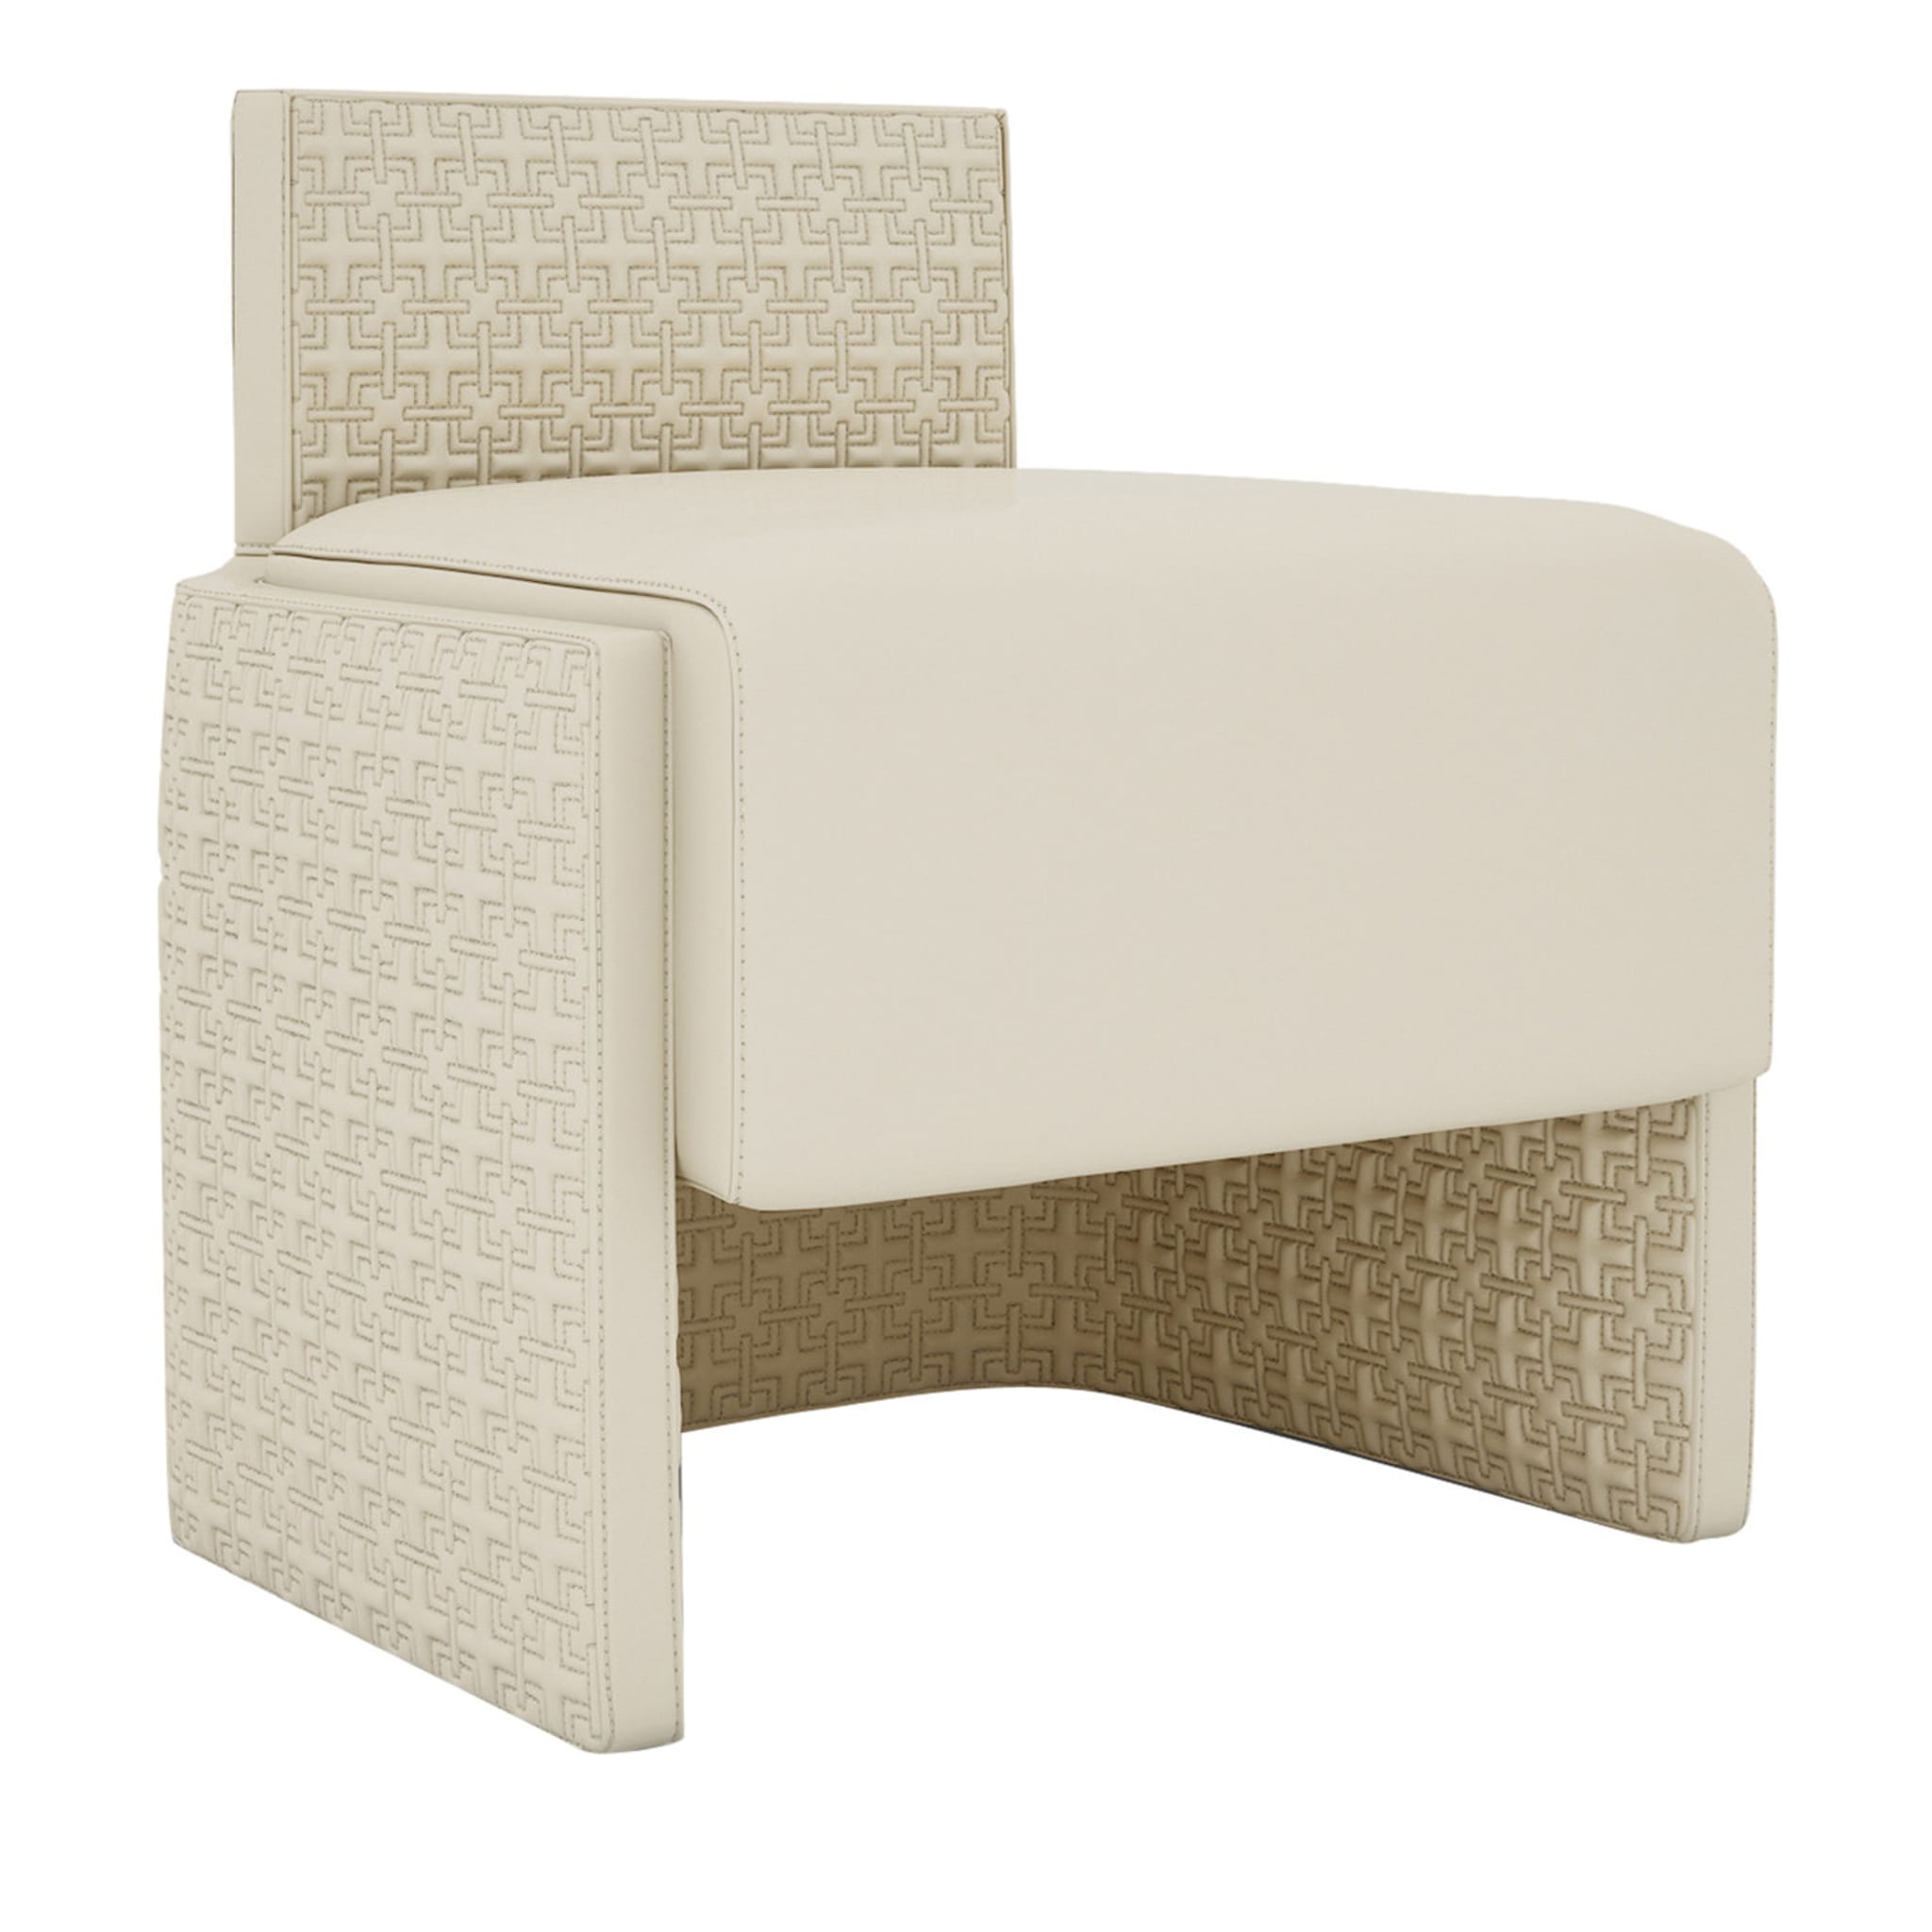 Plaza Armchair by Giannella Ventura - Main view